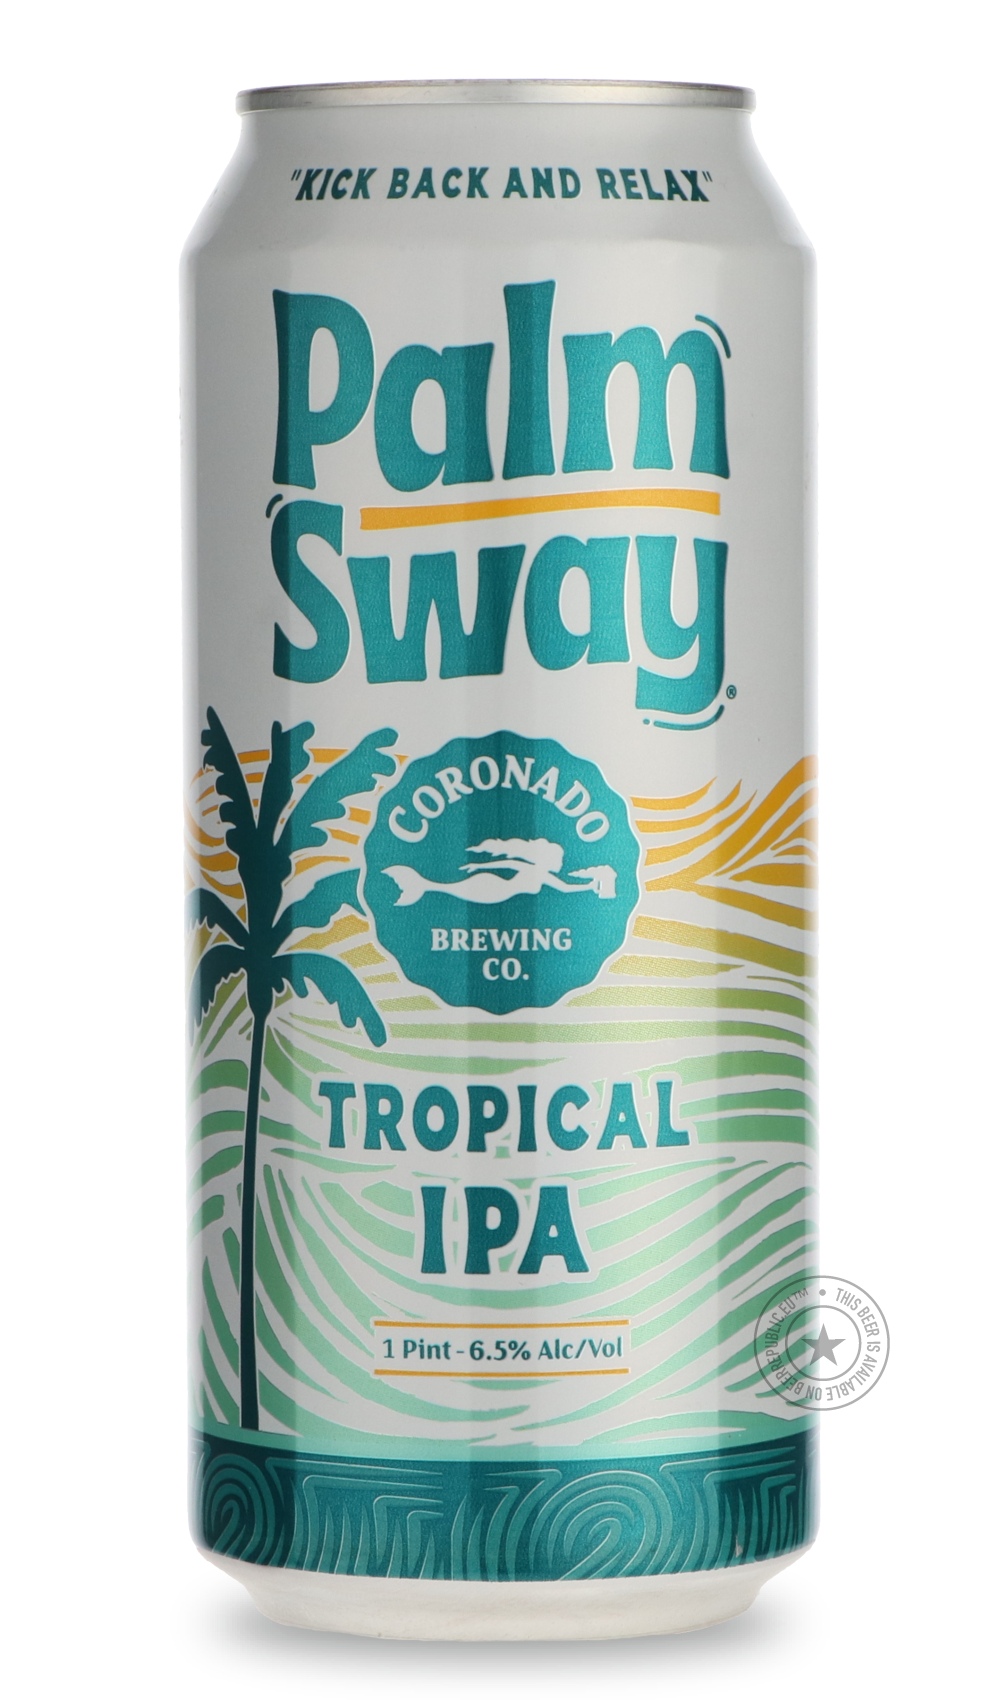 -Coronado- Palm Sway-IPA- Only @ Beer Republic - The best online beer store for American & Canadian craft beer - Buy beer online from the USA and Canada - Bier online kopen - Amerikaans bier kopen - Craft beer store - Craft beer kopen - Amerikanisch bier kaufen - Bier online kaufen - Acheter biere online - IPA - Stout - Porter - New England IPA - Hazy IPA - Imperial Stout - Barrel Aged - Barrel Aged Imperial Stout - Brown - Dark beer - Blond - Blonde - Pilsner - Lager - Wheat - Weizen - Amber - Barley Wine 